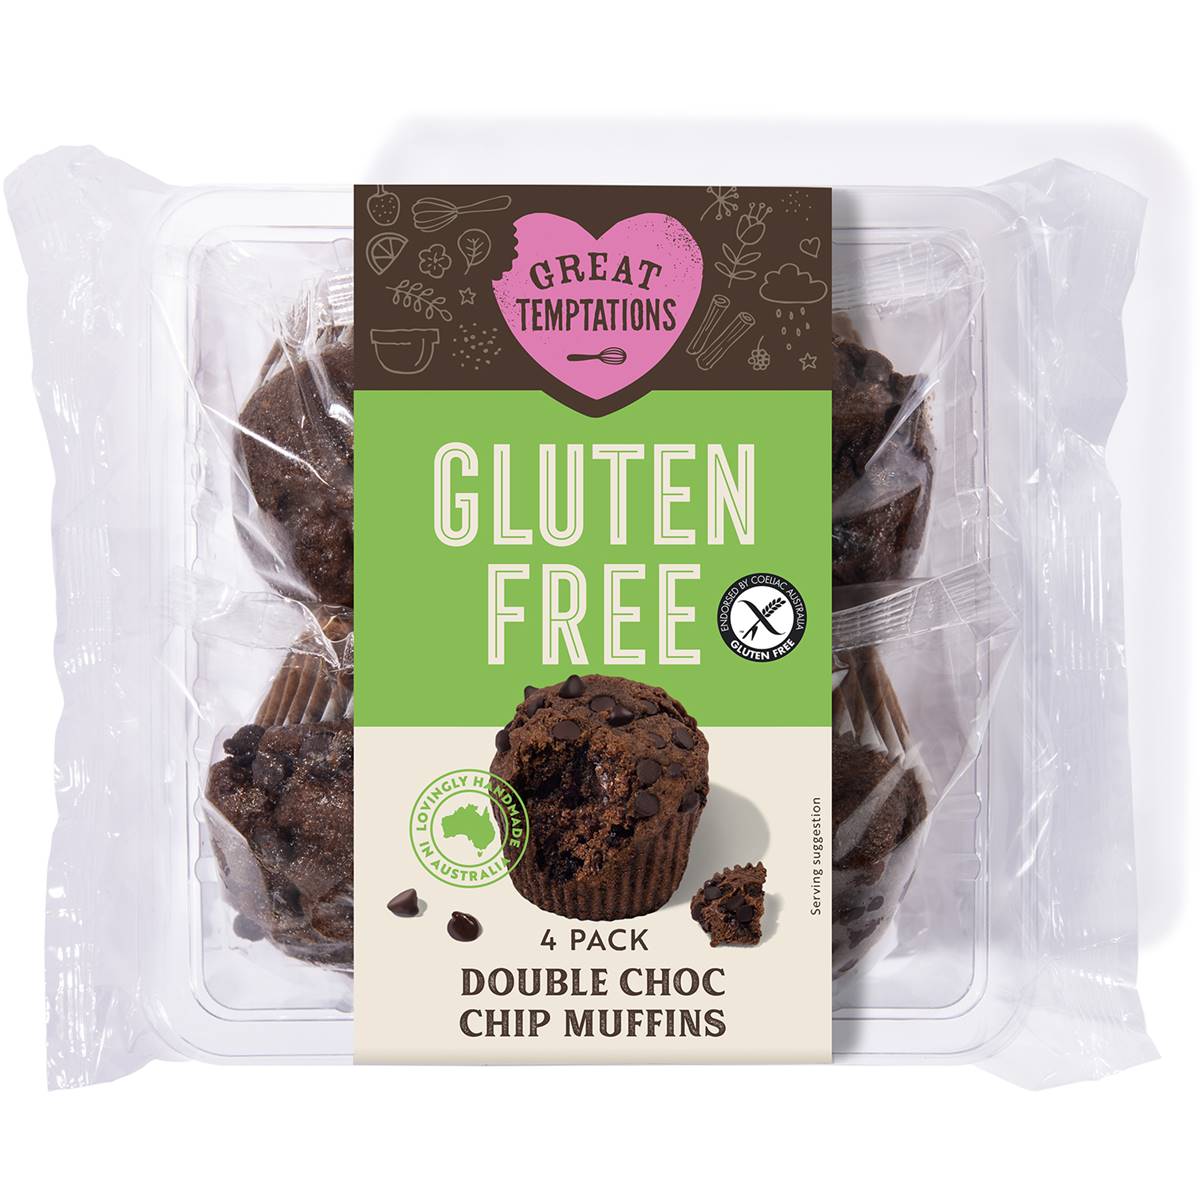 Calories in Great Temptations Gluten Free Double Choc Chip Muffins